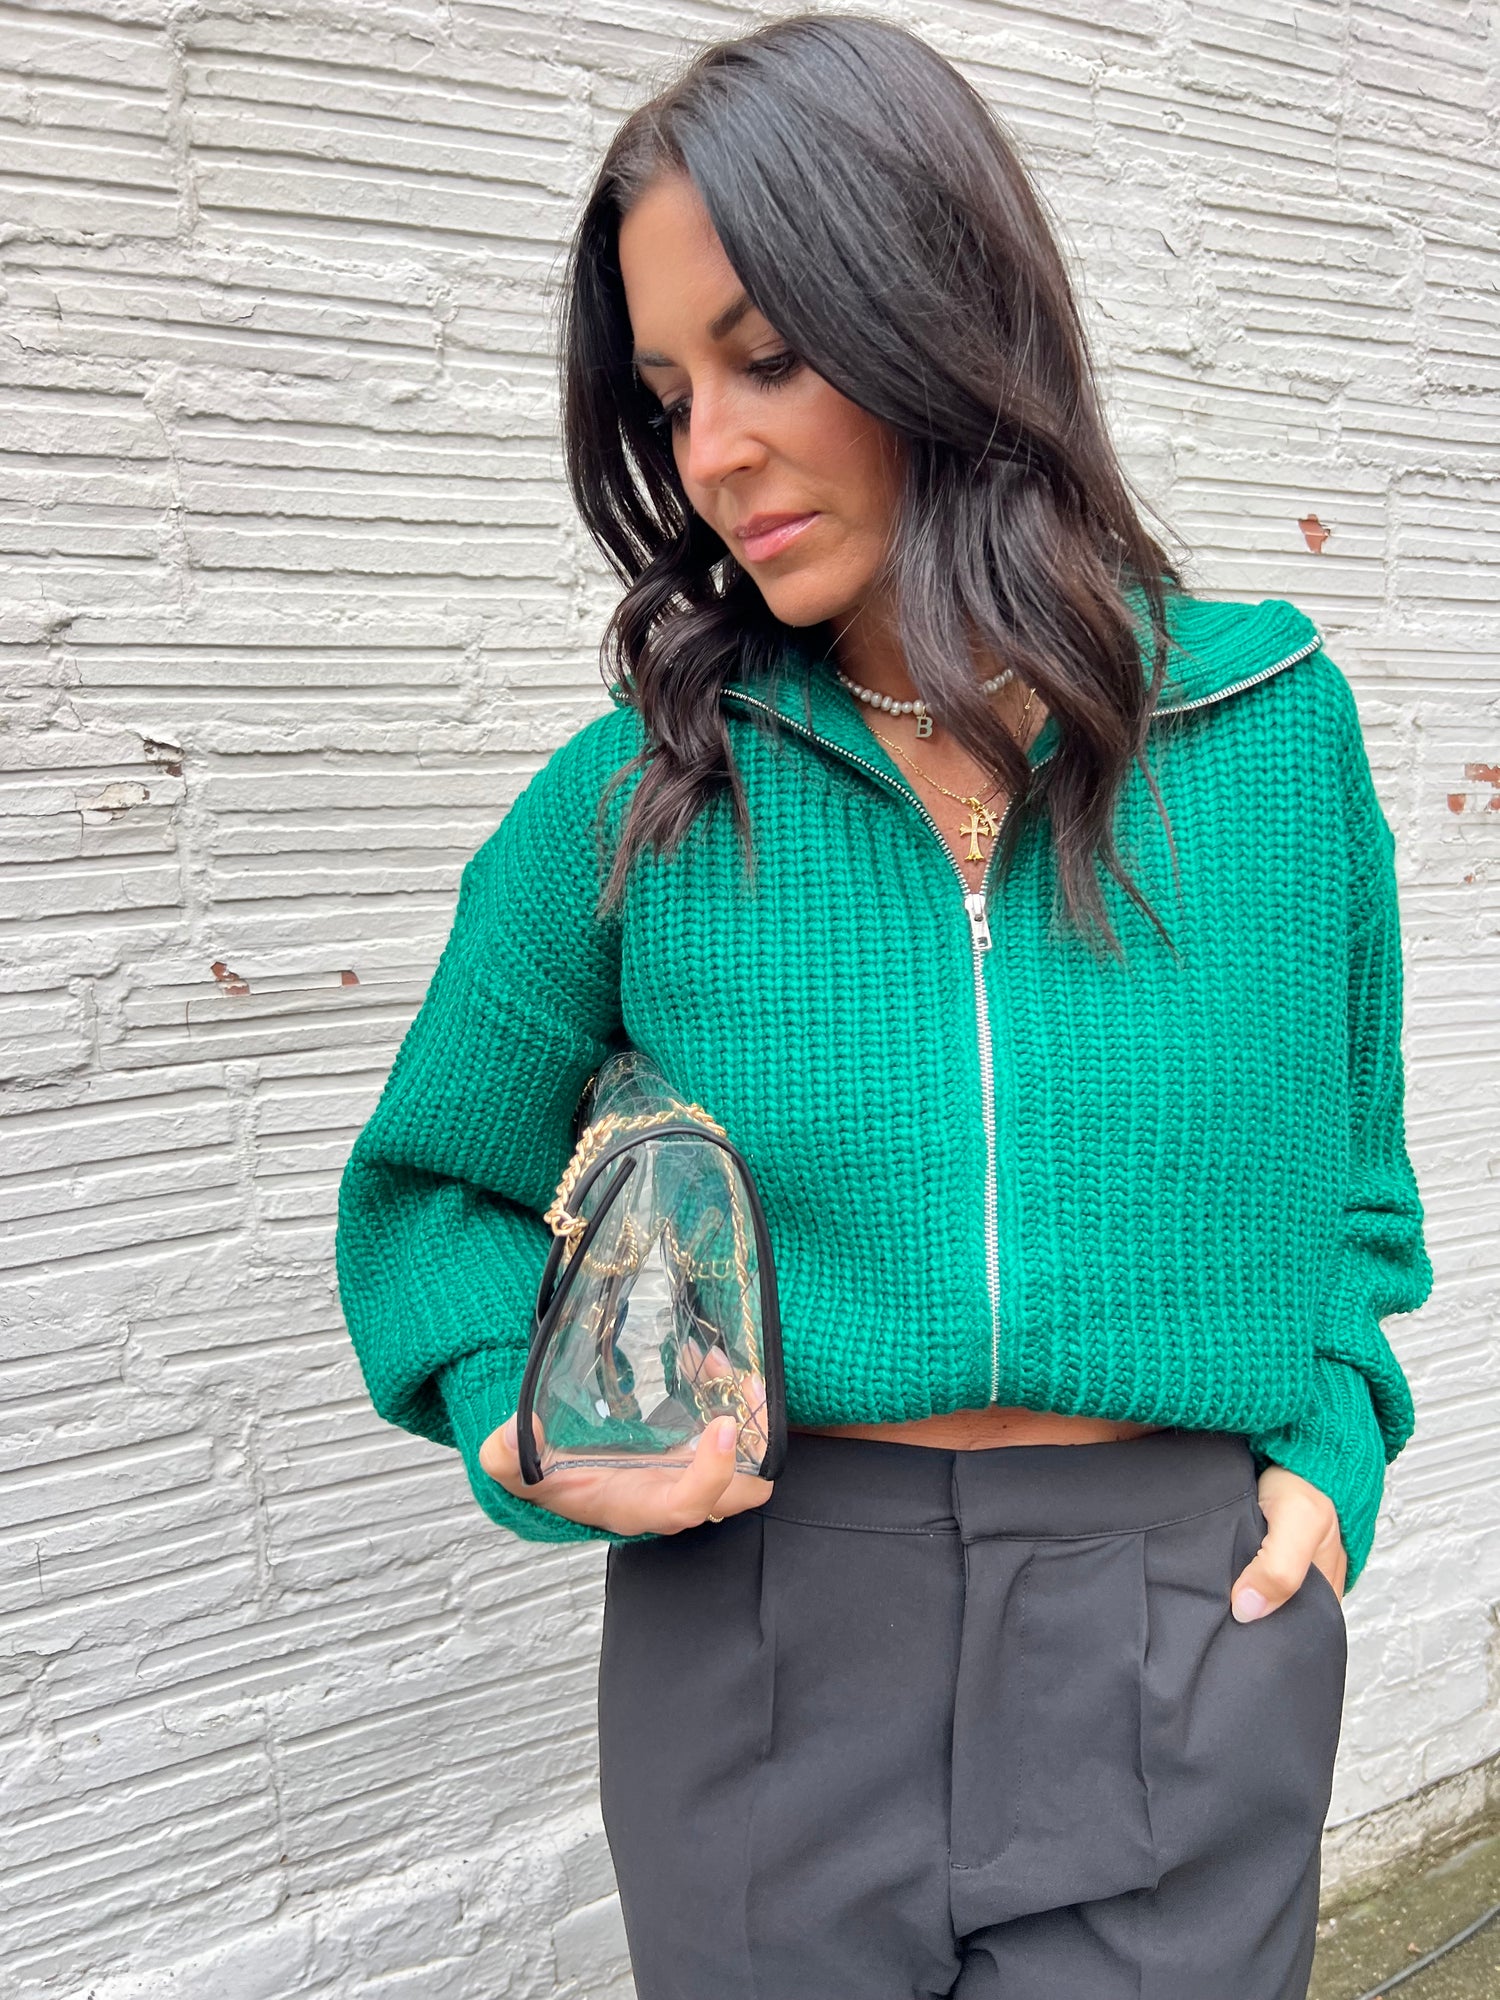 H-TOWN KELLY GREEN CHUNKY ZIP UP SWEATER JACKET - THE HIP EAGLE BOUTIQUE 